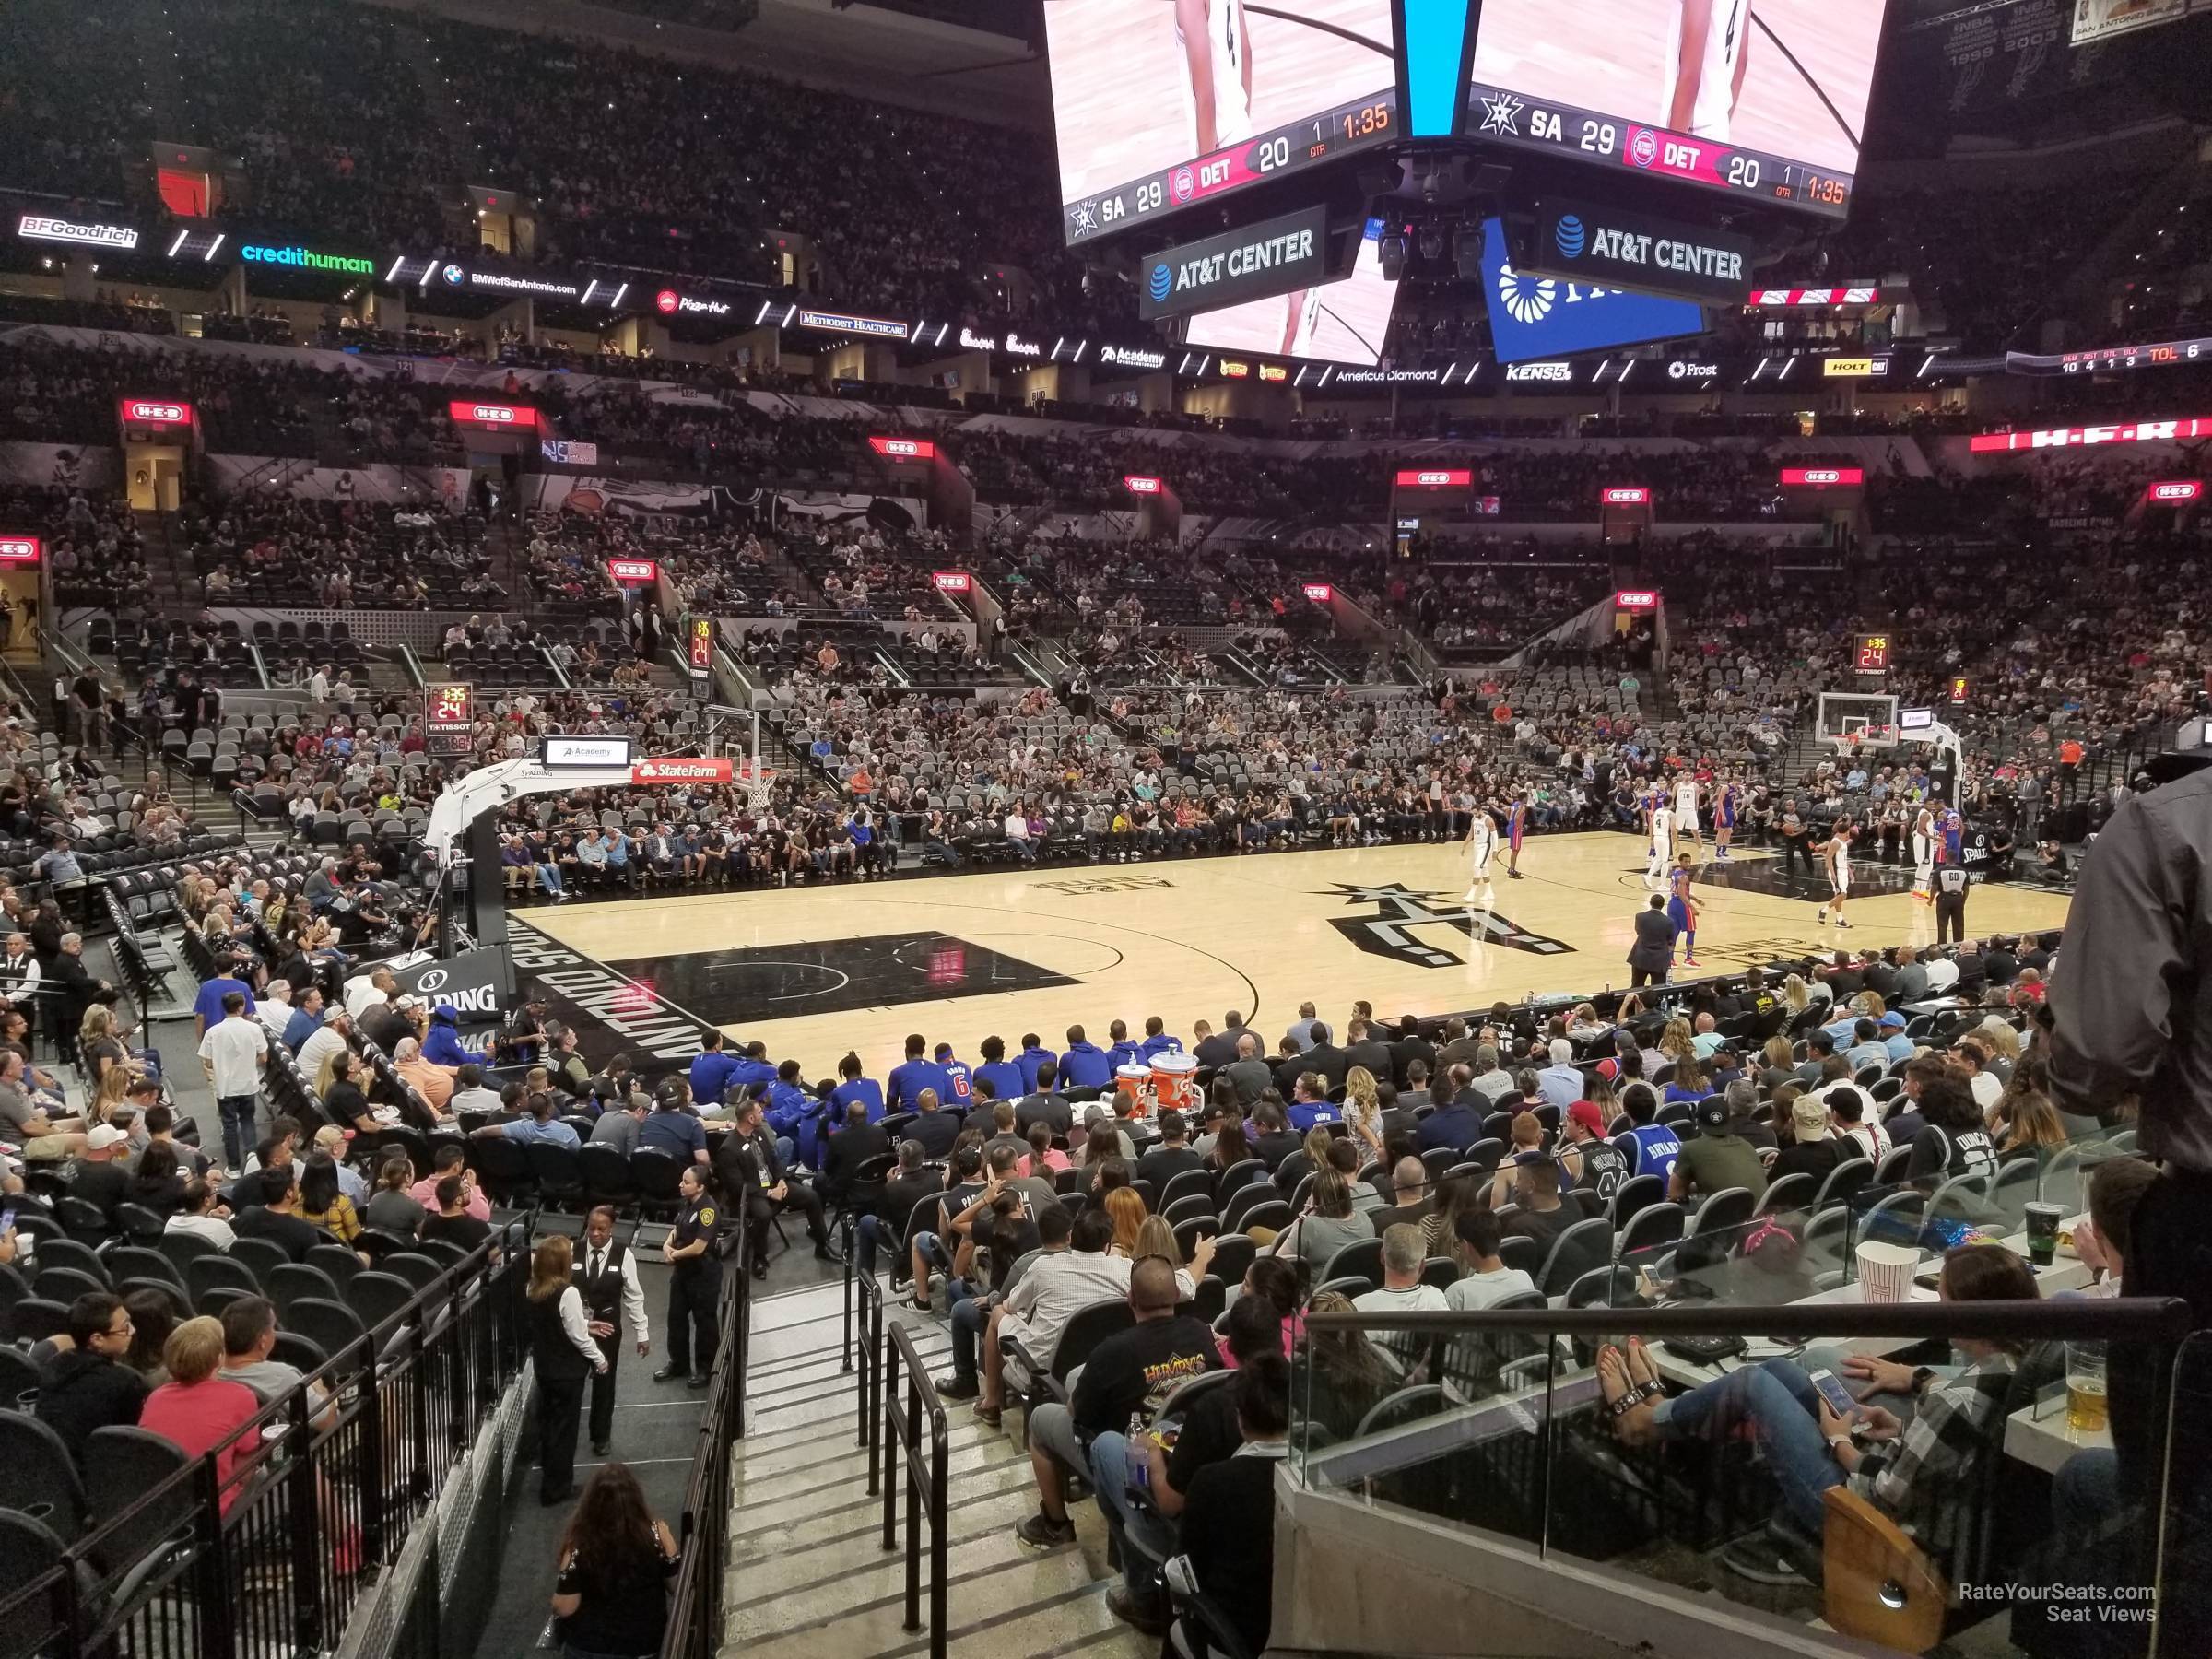 section 14, row 18 seat view  for basketball - at&t center